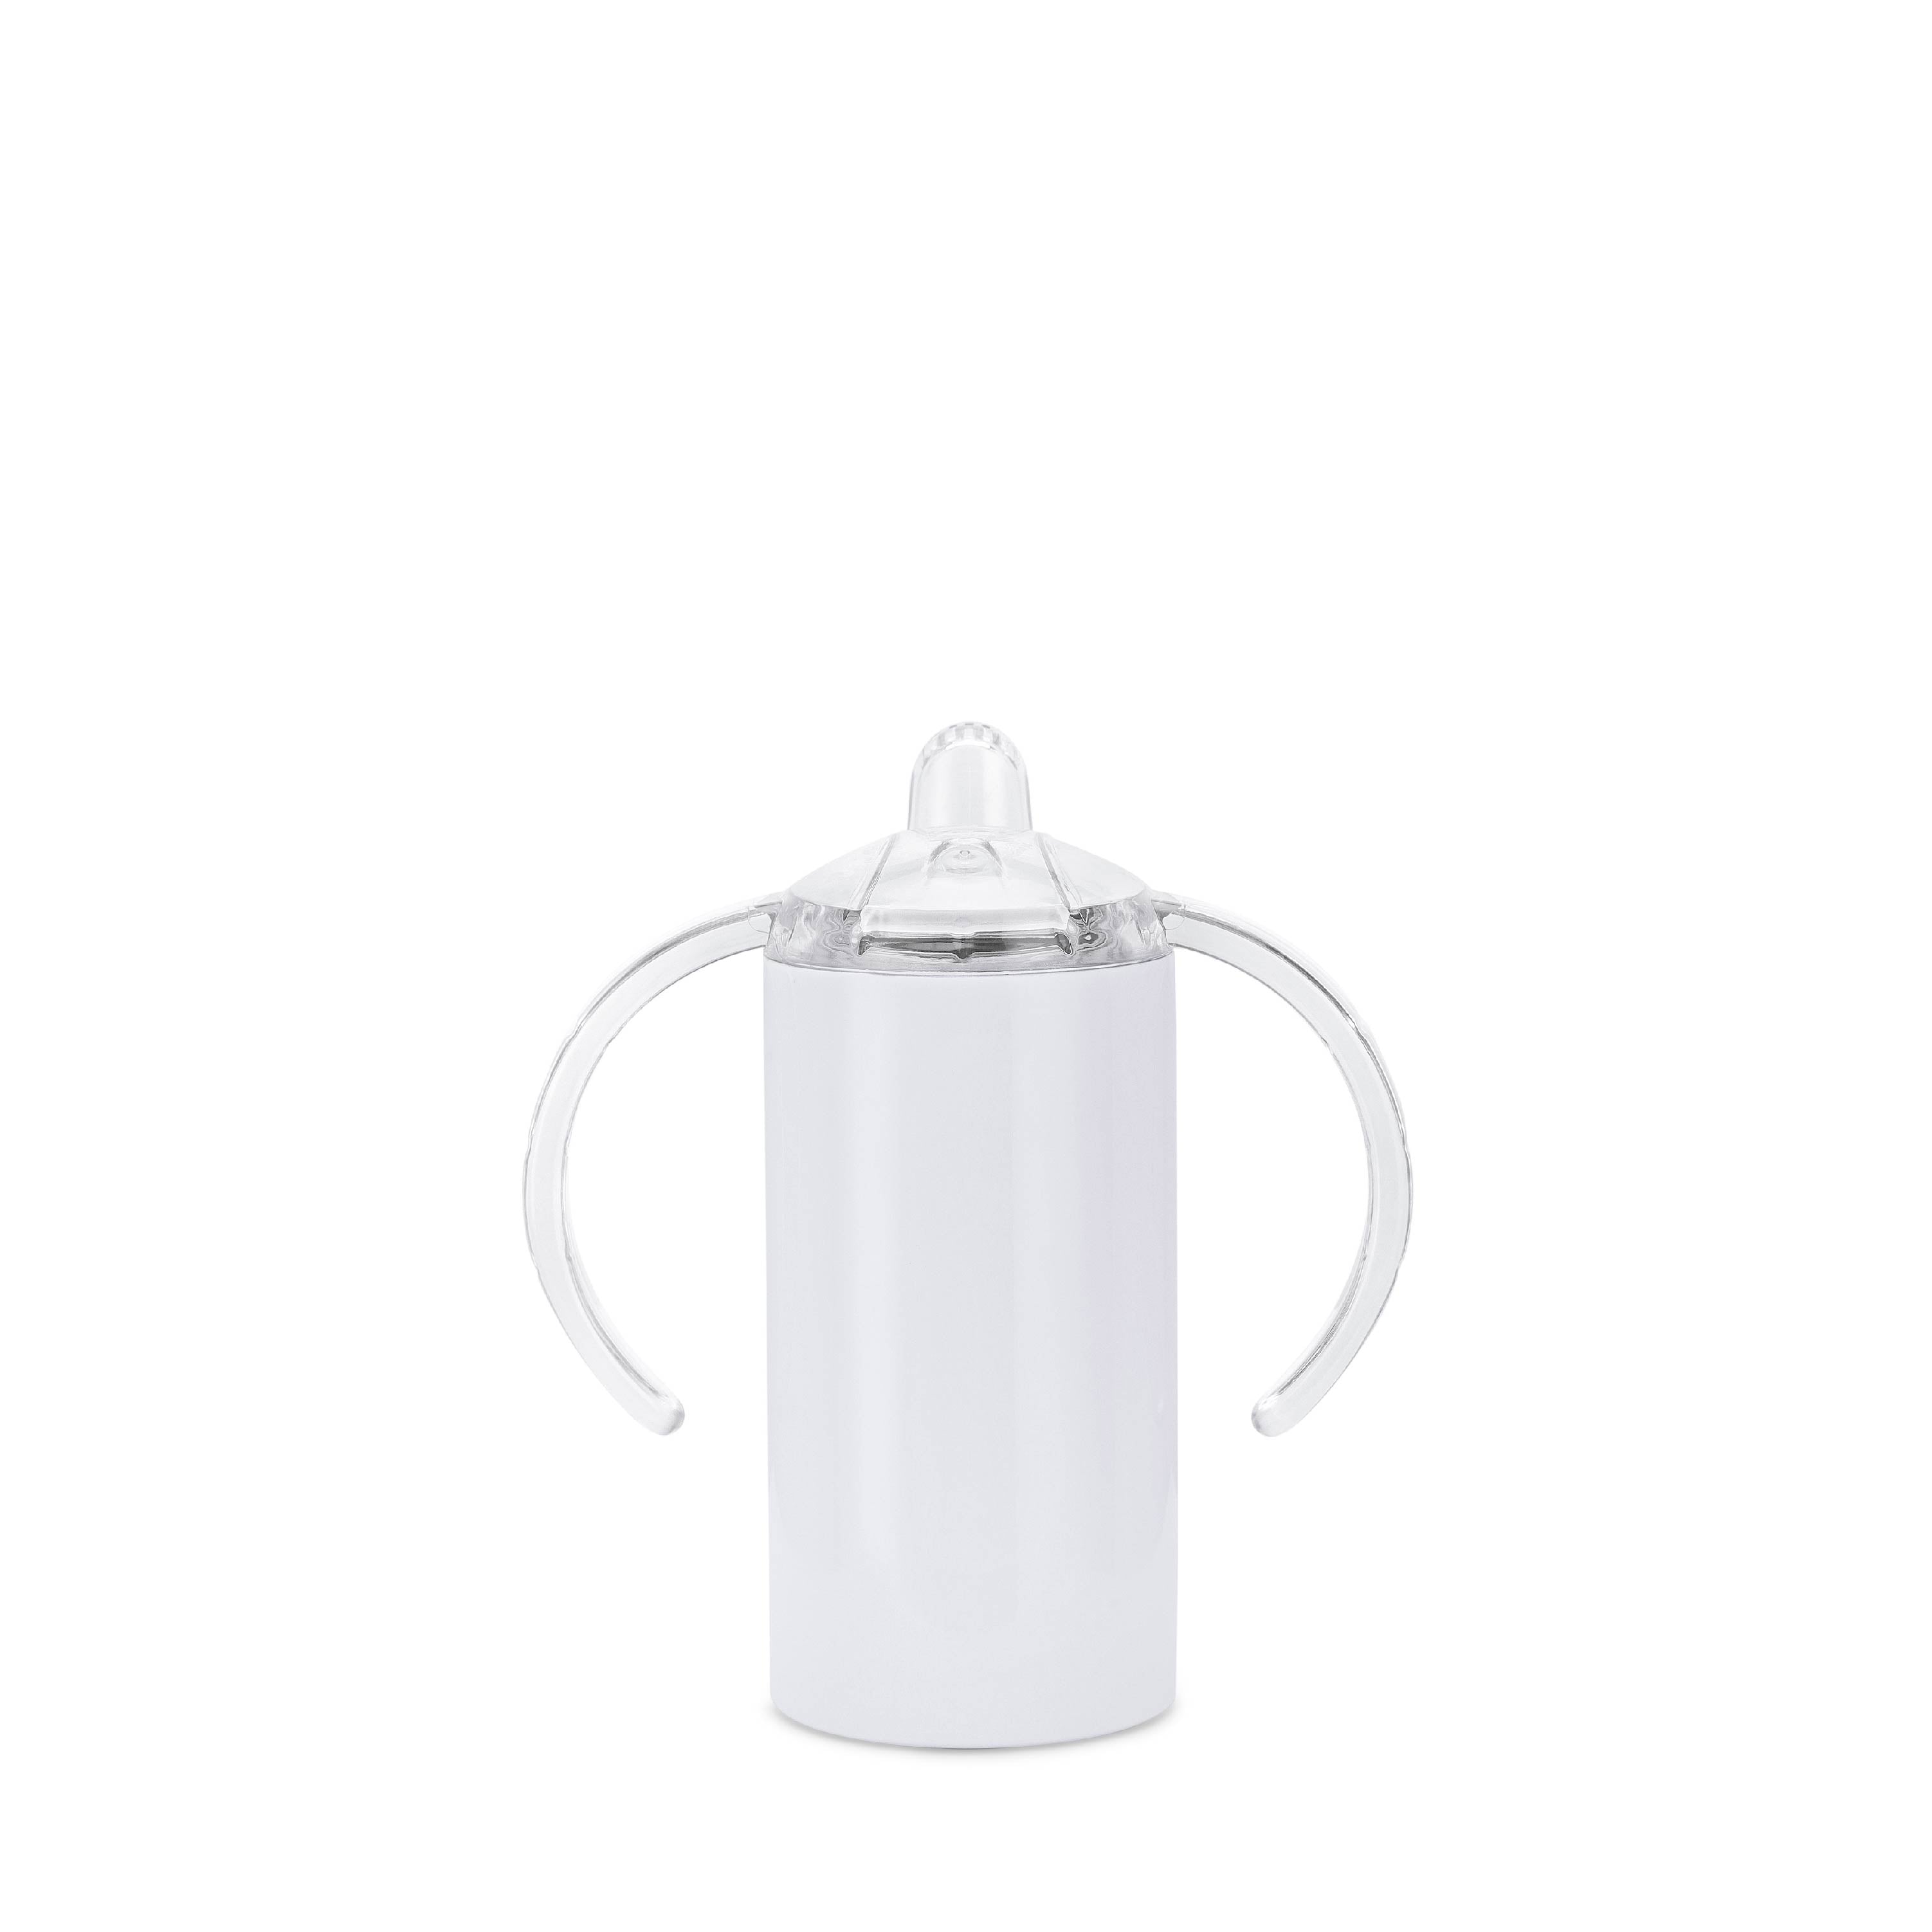 Sublimation 13oz/400ml Stainless Steel Sippy Cup with Spout (White) FL-10